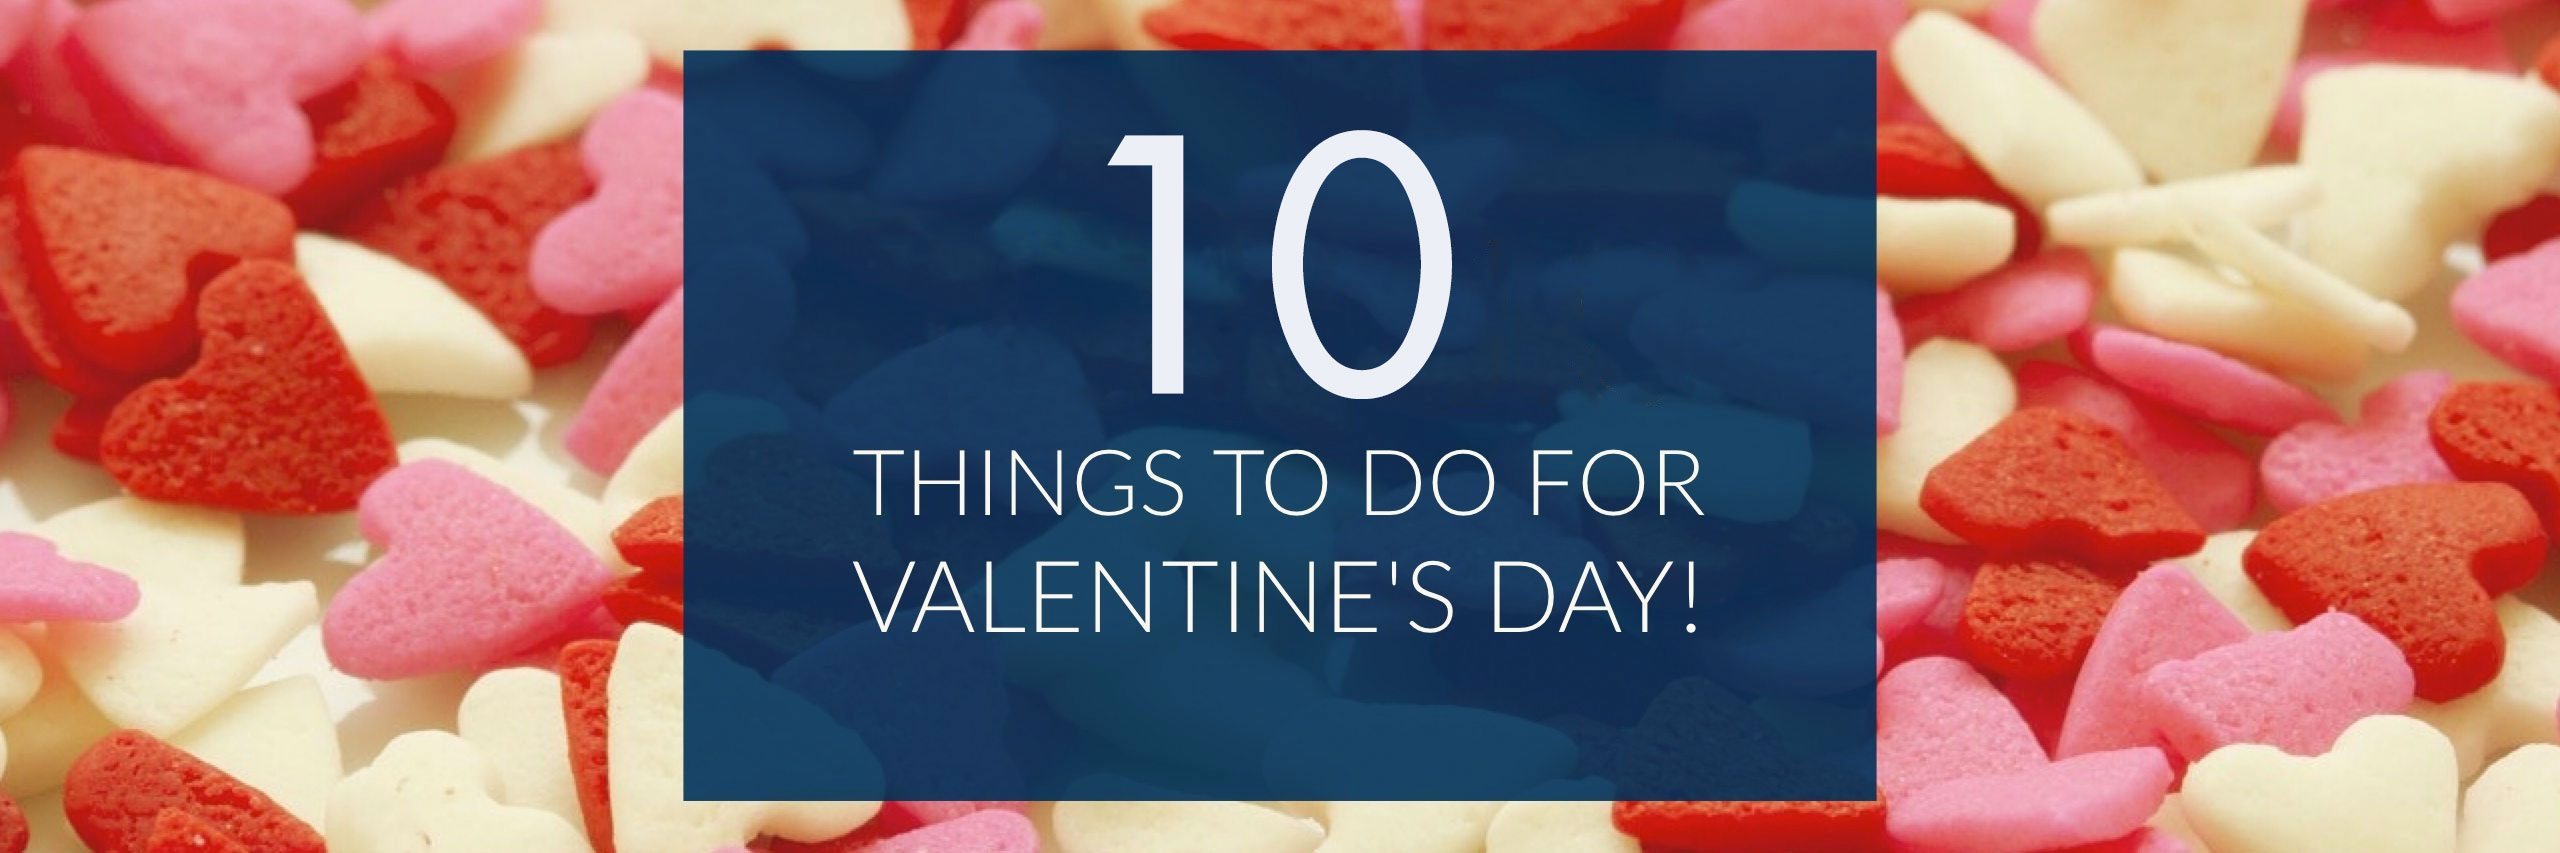 10 Things to Do For Valentine's Day